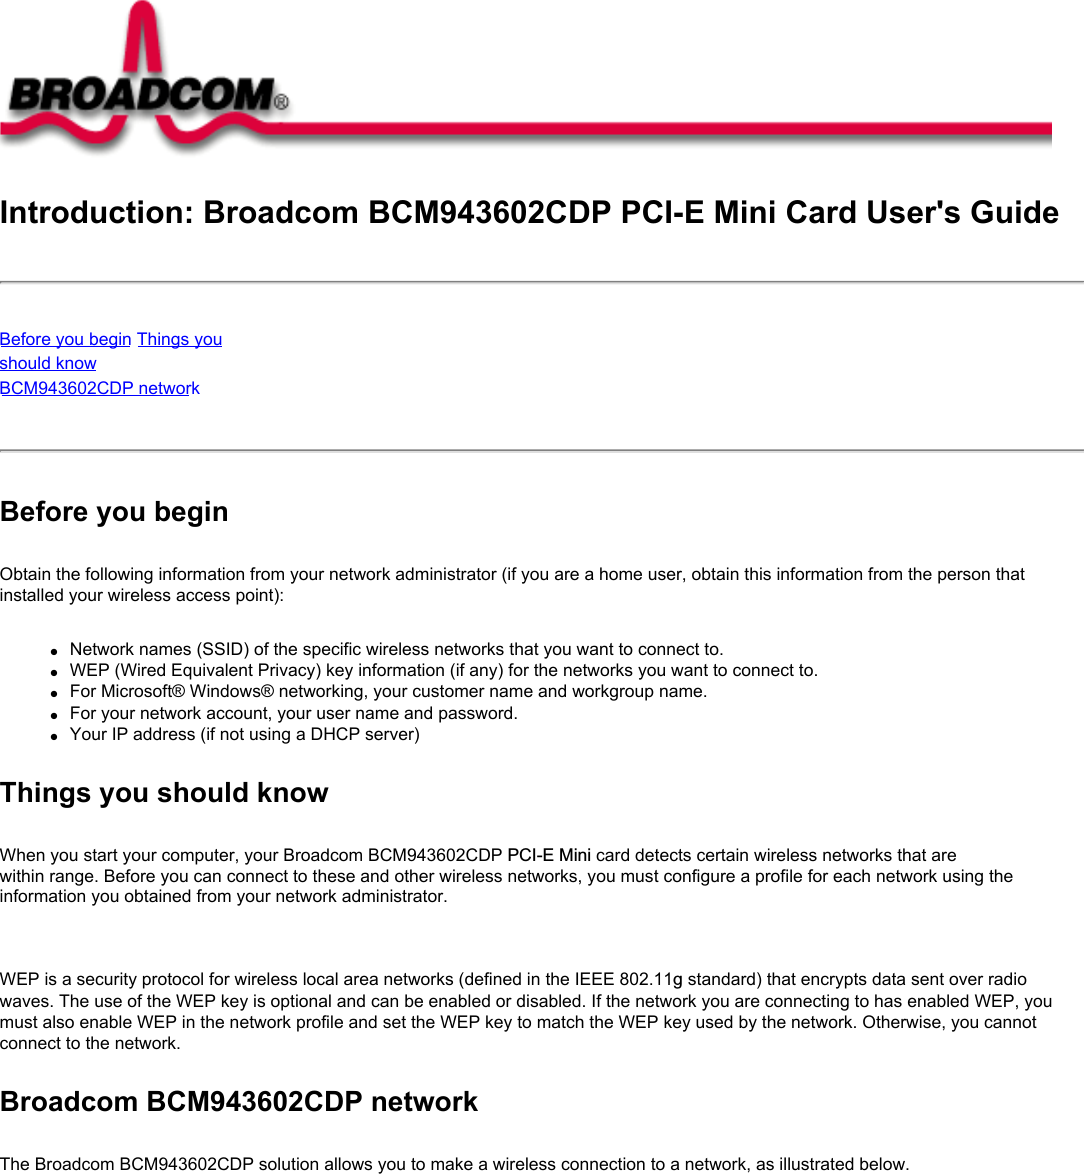 Introduction: Broadcom BCM943602CDP PCI-E Mini Card User&apos;s GuideBefore you begin Things you should know BCM943602CDP network Before you beginObtain the following information from your network administrator (if you are a home user, obtain this information from the person that installed your wireless access point):●Network names (SSID) of the specific wireless networks that you want to connect to.●WEP (Wired Equivalent Privacy) key information (if any) for the networks you want to connect to.●For Microsoft® Windows® networking, your customer name and workgroup name.●For your network account, your user name and password.●Your IP address (if not using a DHCP server)Things you should knowWhen you start your computer, your Broadcom BCM943602CDP PCI-E Mini card detects certain wireless networks that are within range. Before you can connect to these and other wireless networks, you must configure a profile for each network using the information you obtained from your network administrator. WEP is a security protocol for wireless local area networks (defined in the IEEE 802.11g standard) that encrypts data sent over radio waves. The use of the WEP key is optional and can be enabled or disabled. If the network you are connecting to has enabled WEP, you must also enable WEP in the network profile and set the WEP key to match the WEP key used by the network. Otherwise, you cannot connect to the network.Broadcom BCM943602CDP networkThe Broadcom BCM943602CDP solution allows you to make a wireless connection to a network, as illustrated below.